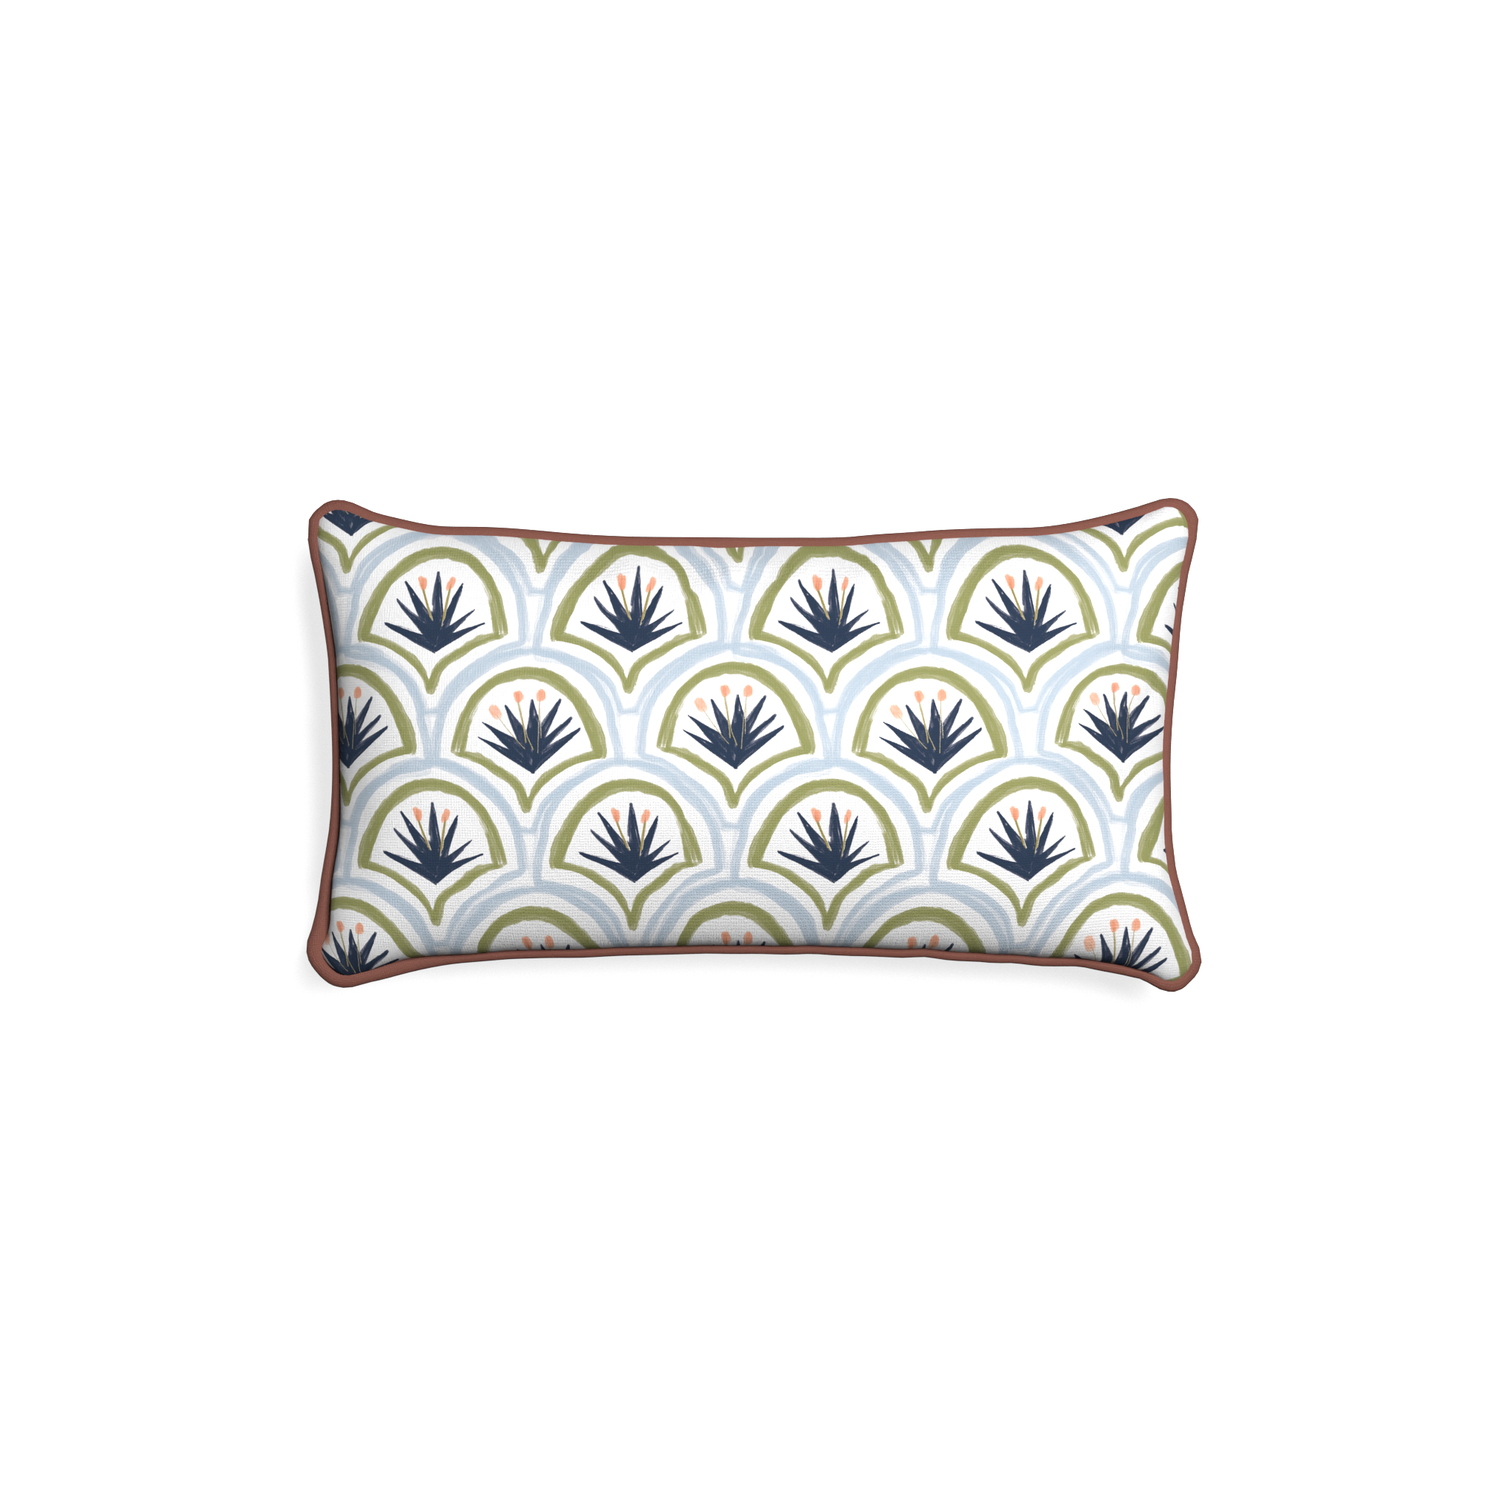 Petite-lumbar thatcher midnight custom art deco palm patternpillow with w piping on white background